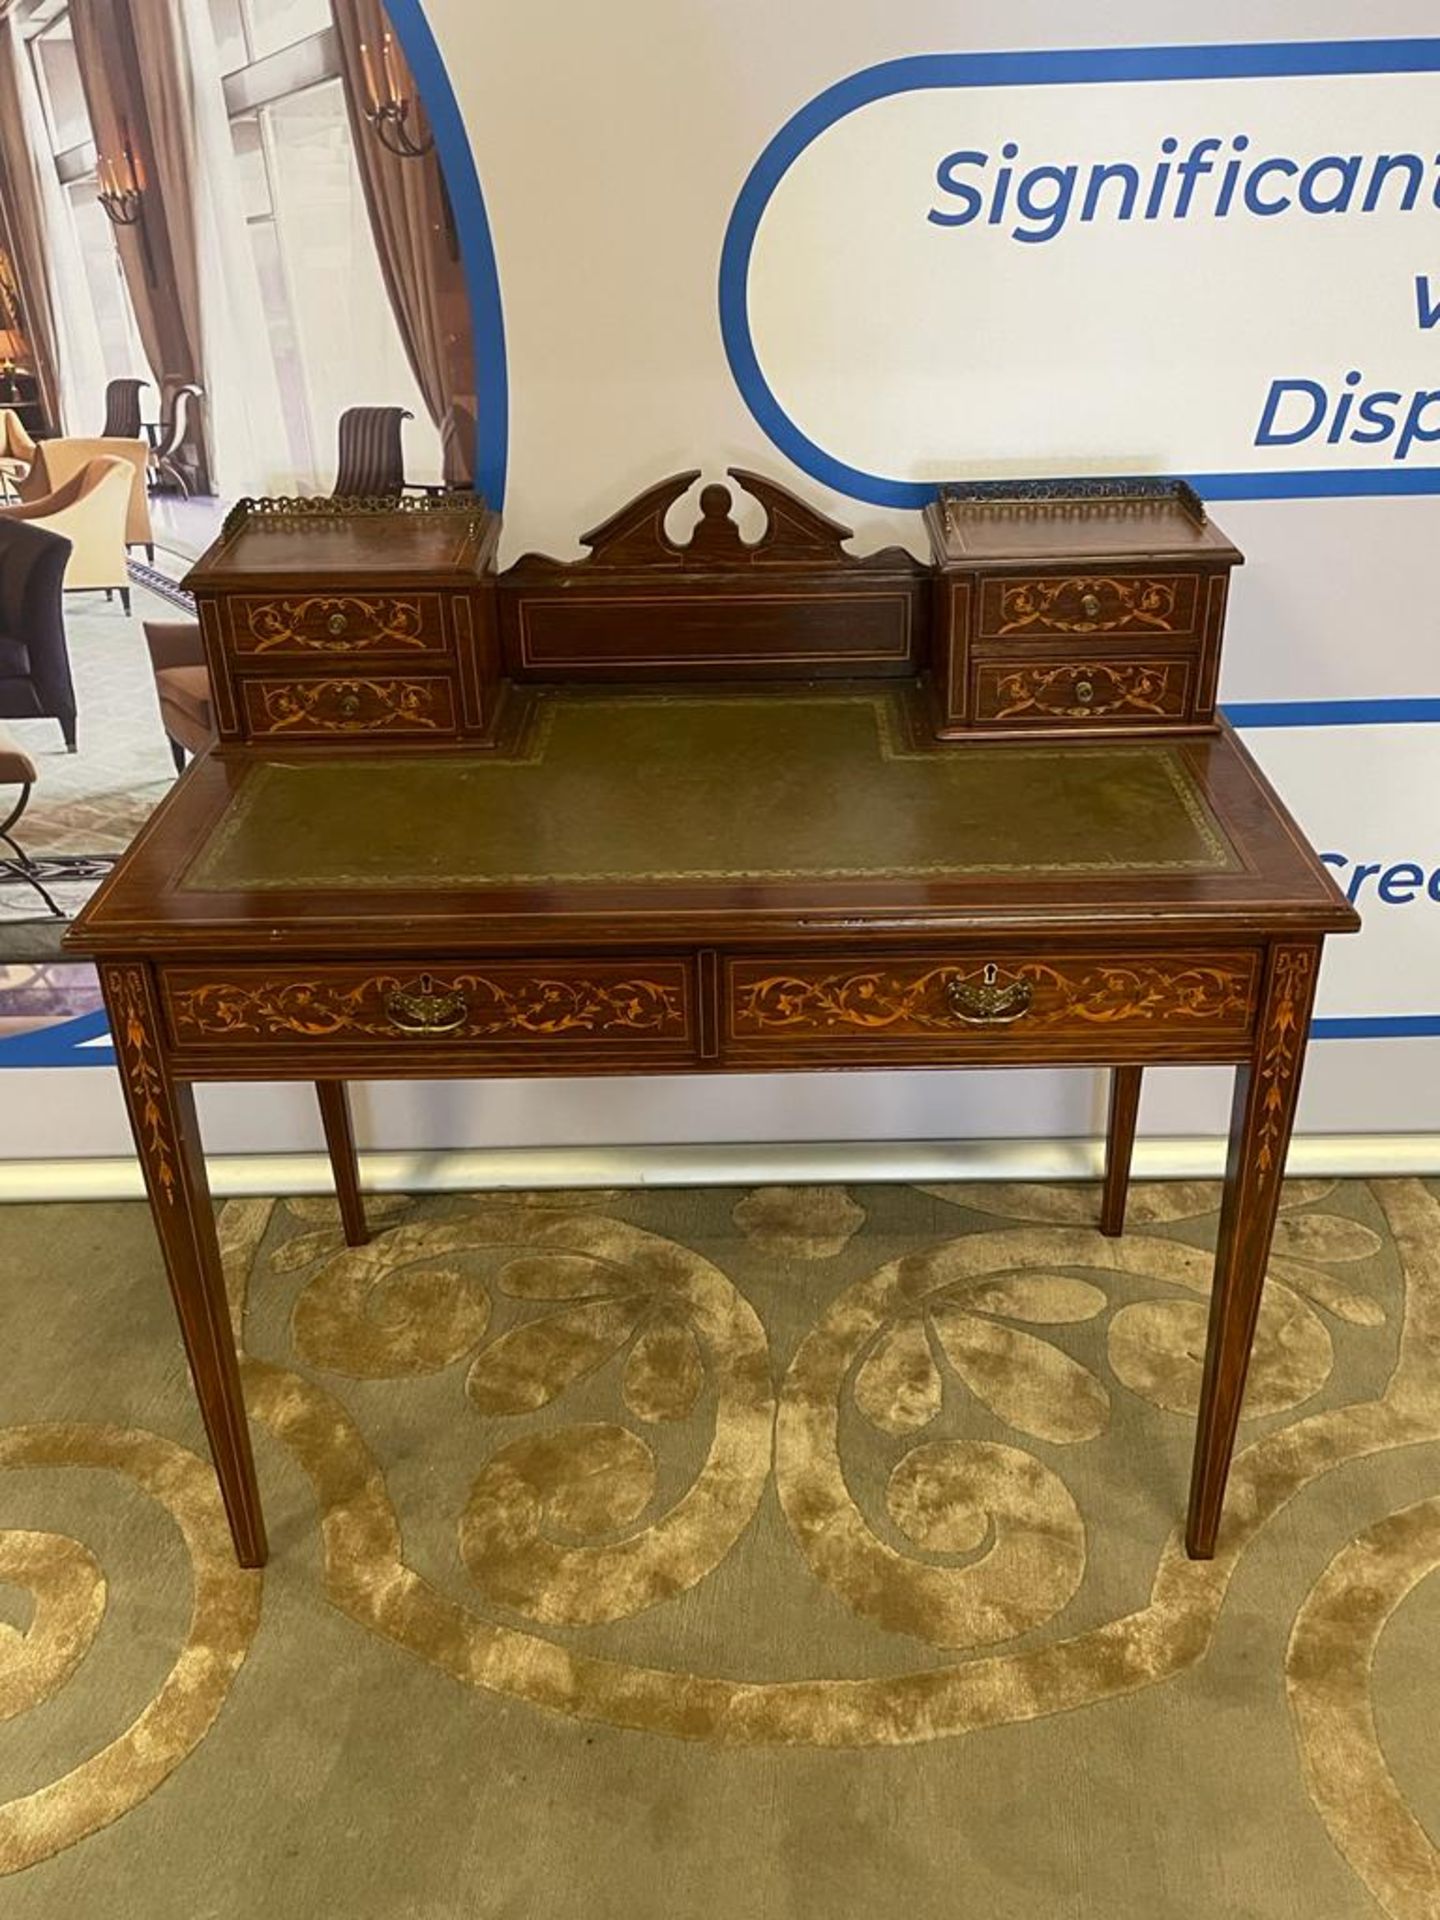 Mahogany Inlaid Marquetry Edwardian Carlton House style Desk The top of the desk is surmounted